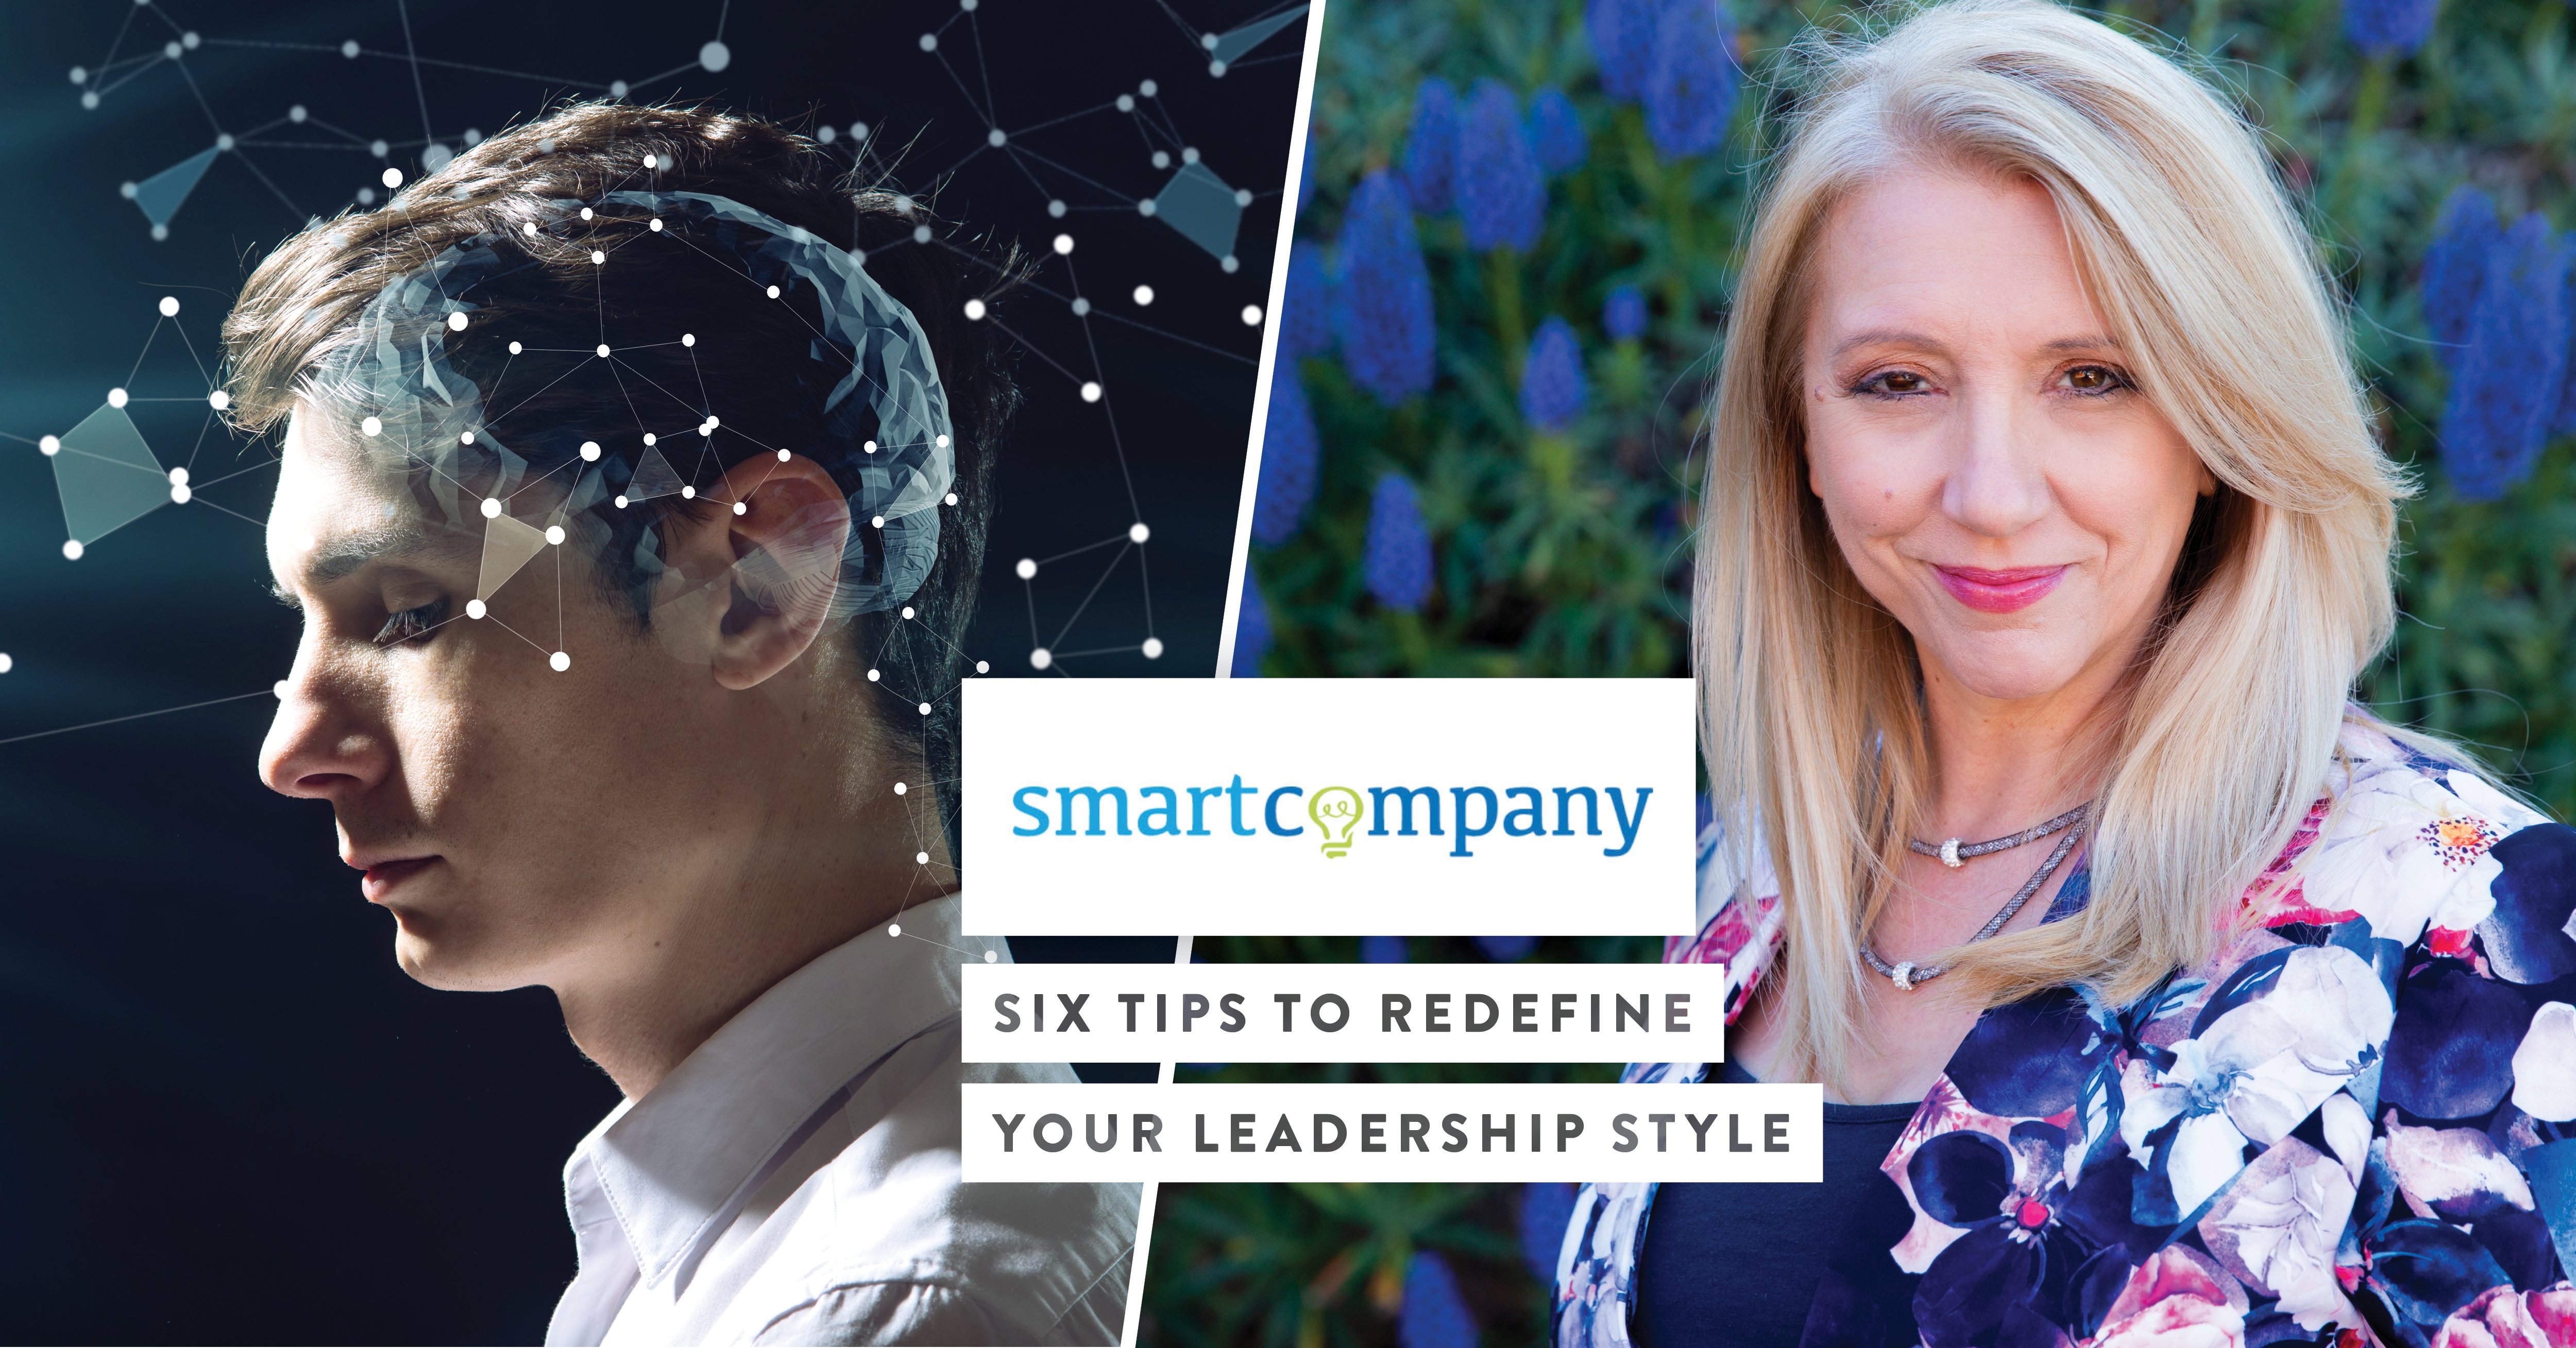 smart-company-six-tips-redefine-leadership-style